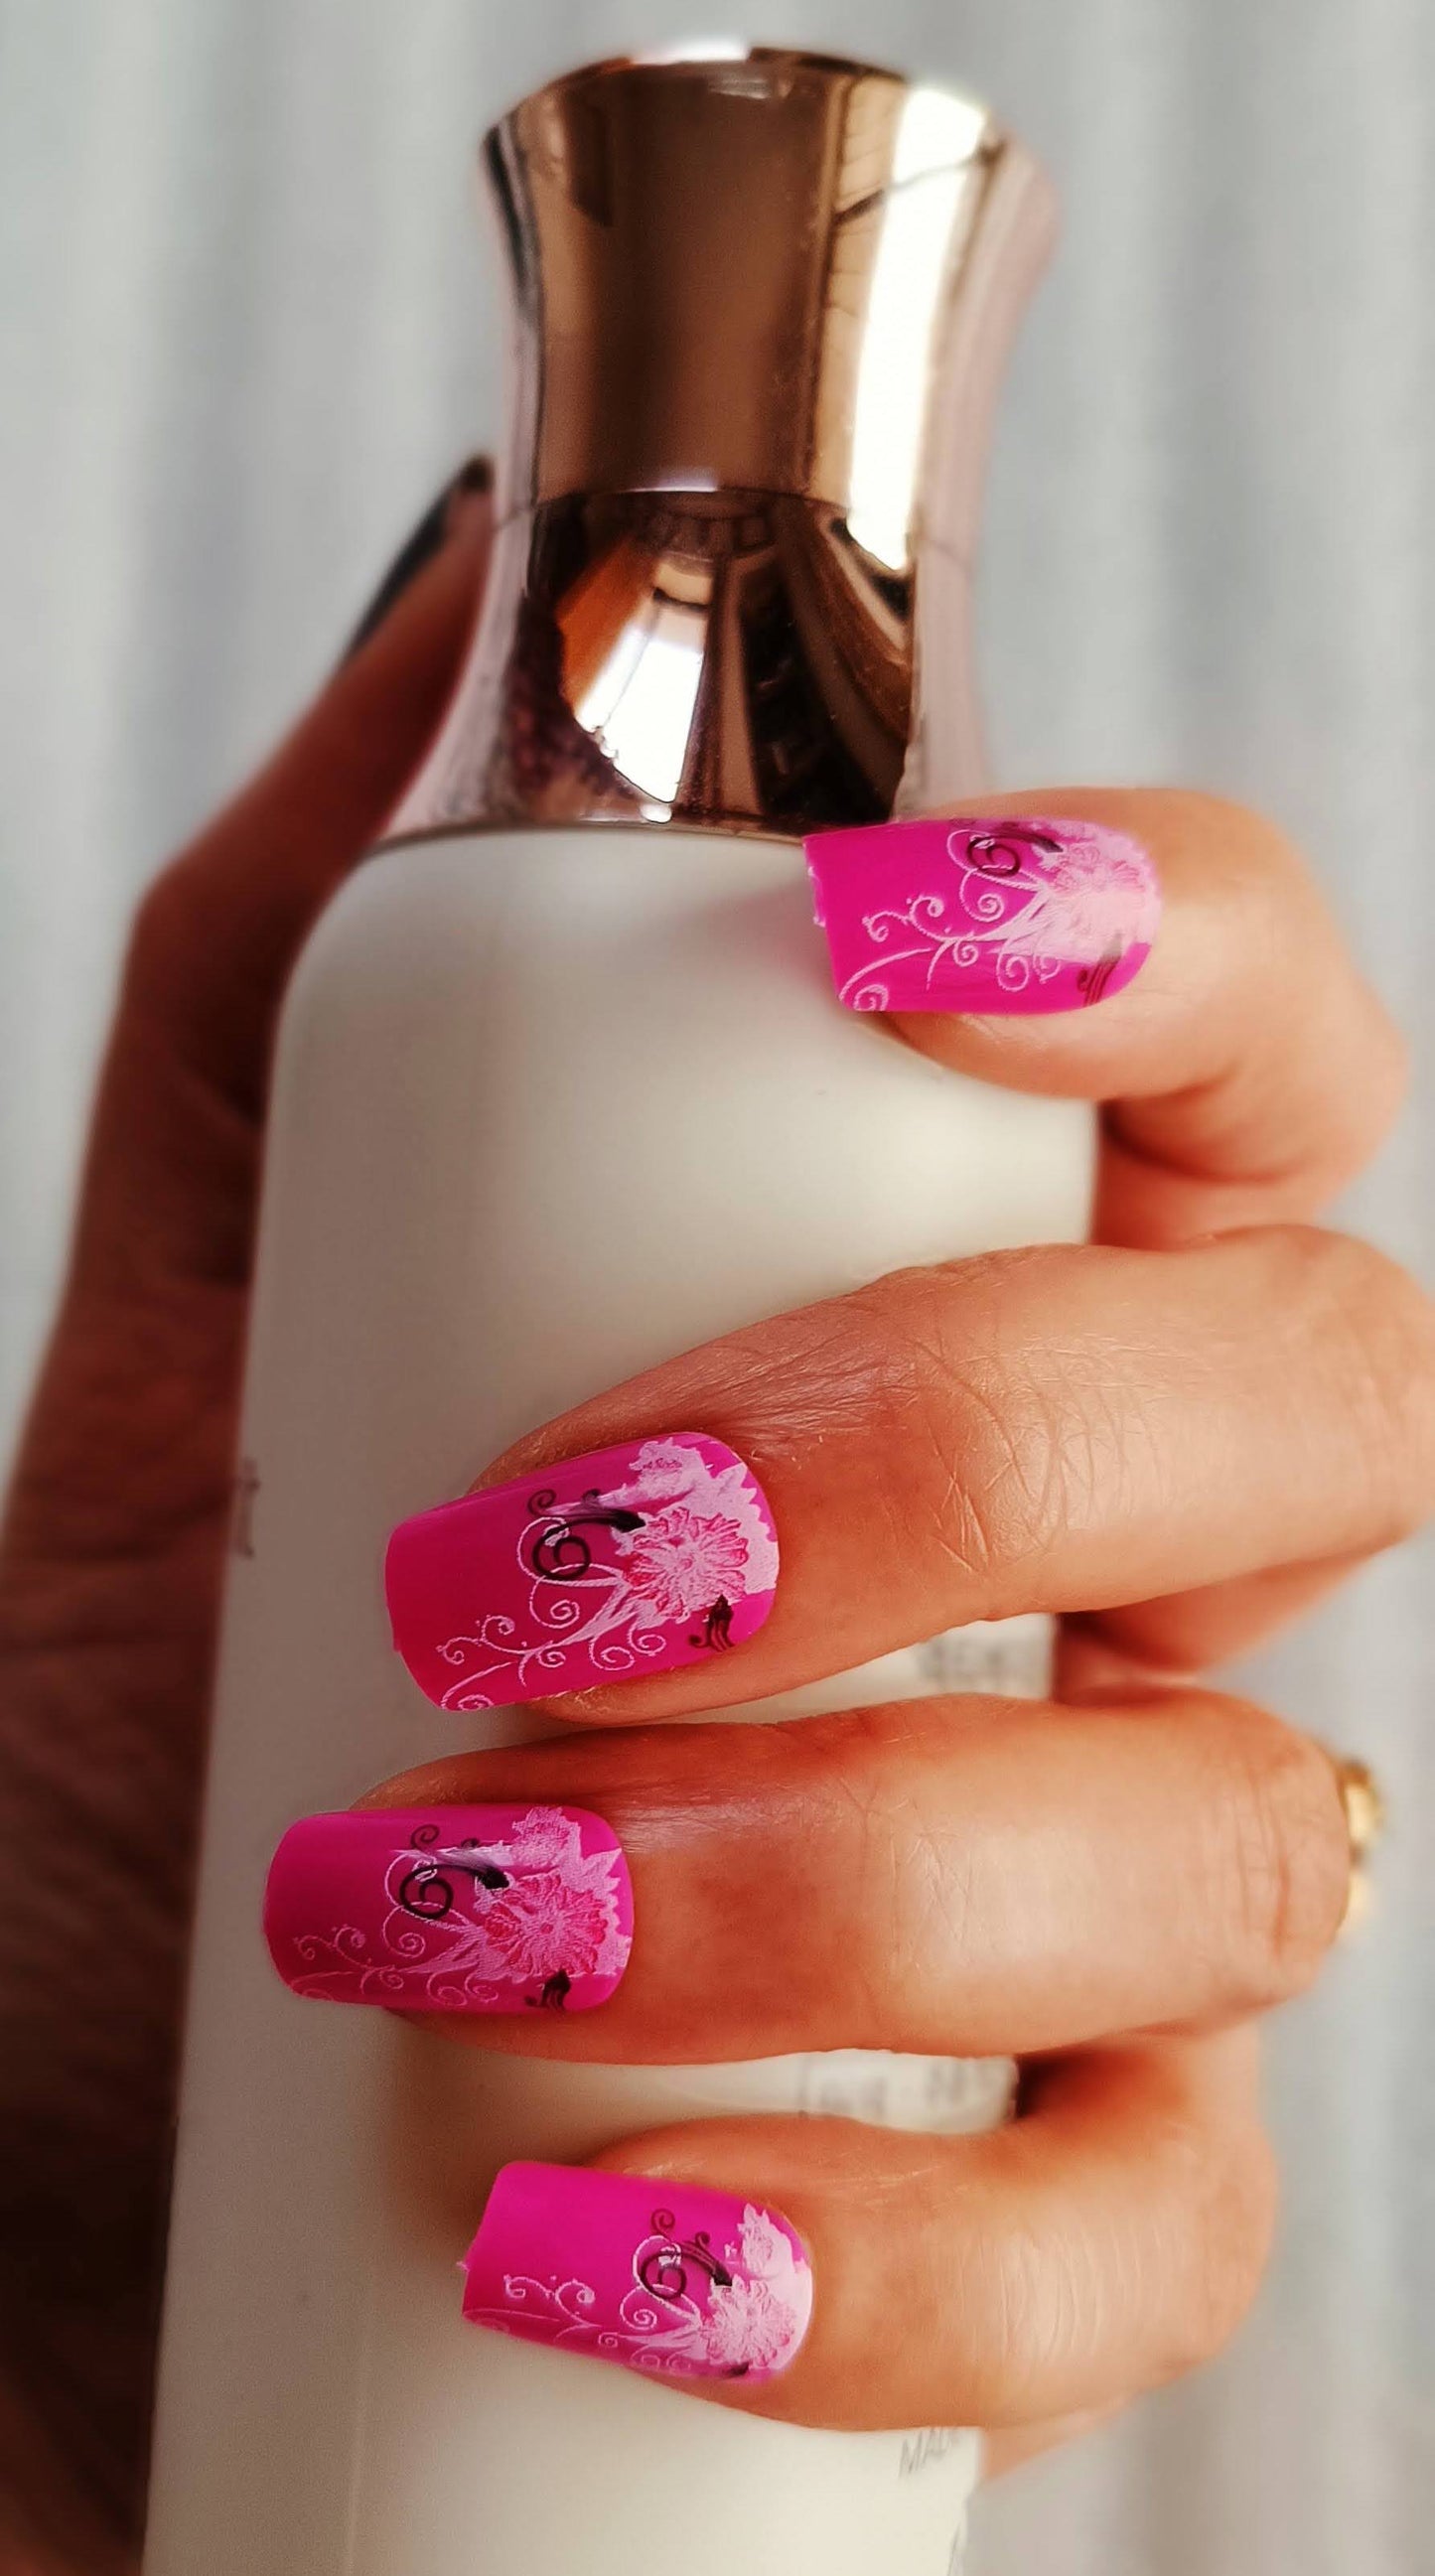 Acrylic/ Press-on Designer Nails with Glue Tabs | Artificial Nails Under 50  - Box Shaped Pink Designer